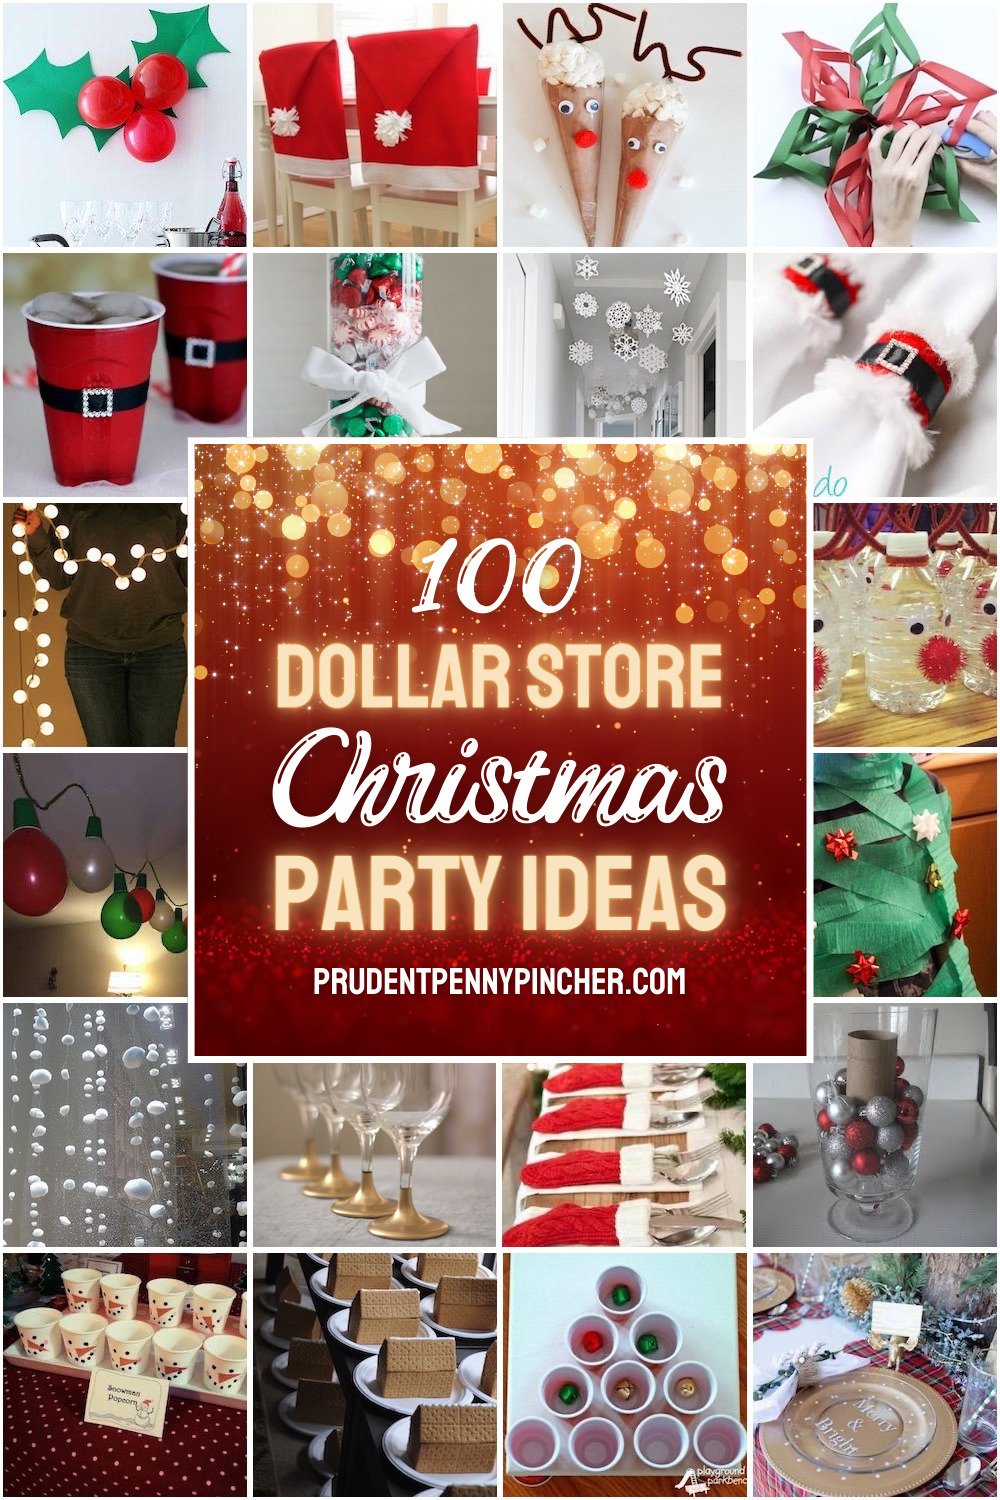 dollar store Christmas party ideas